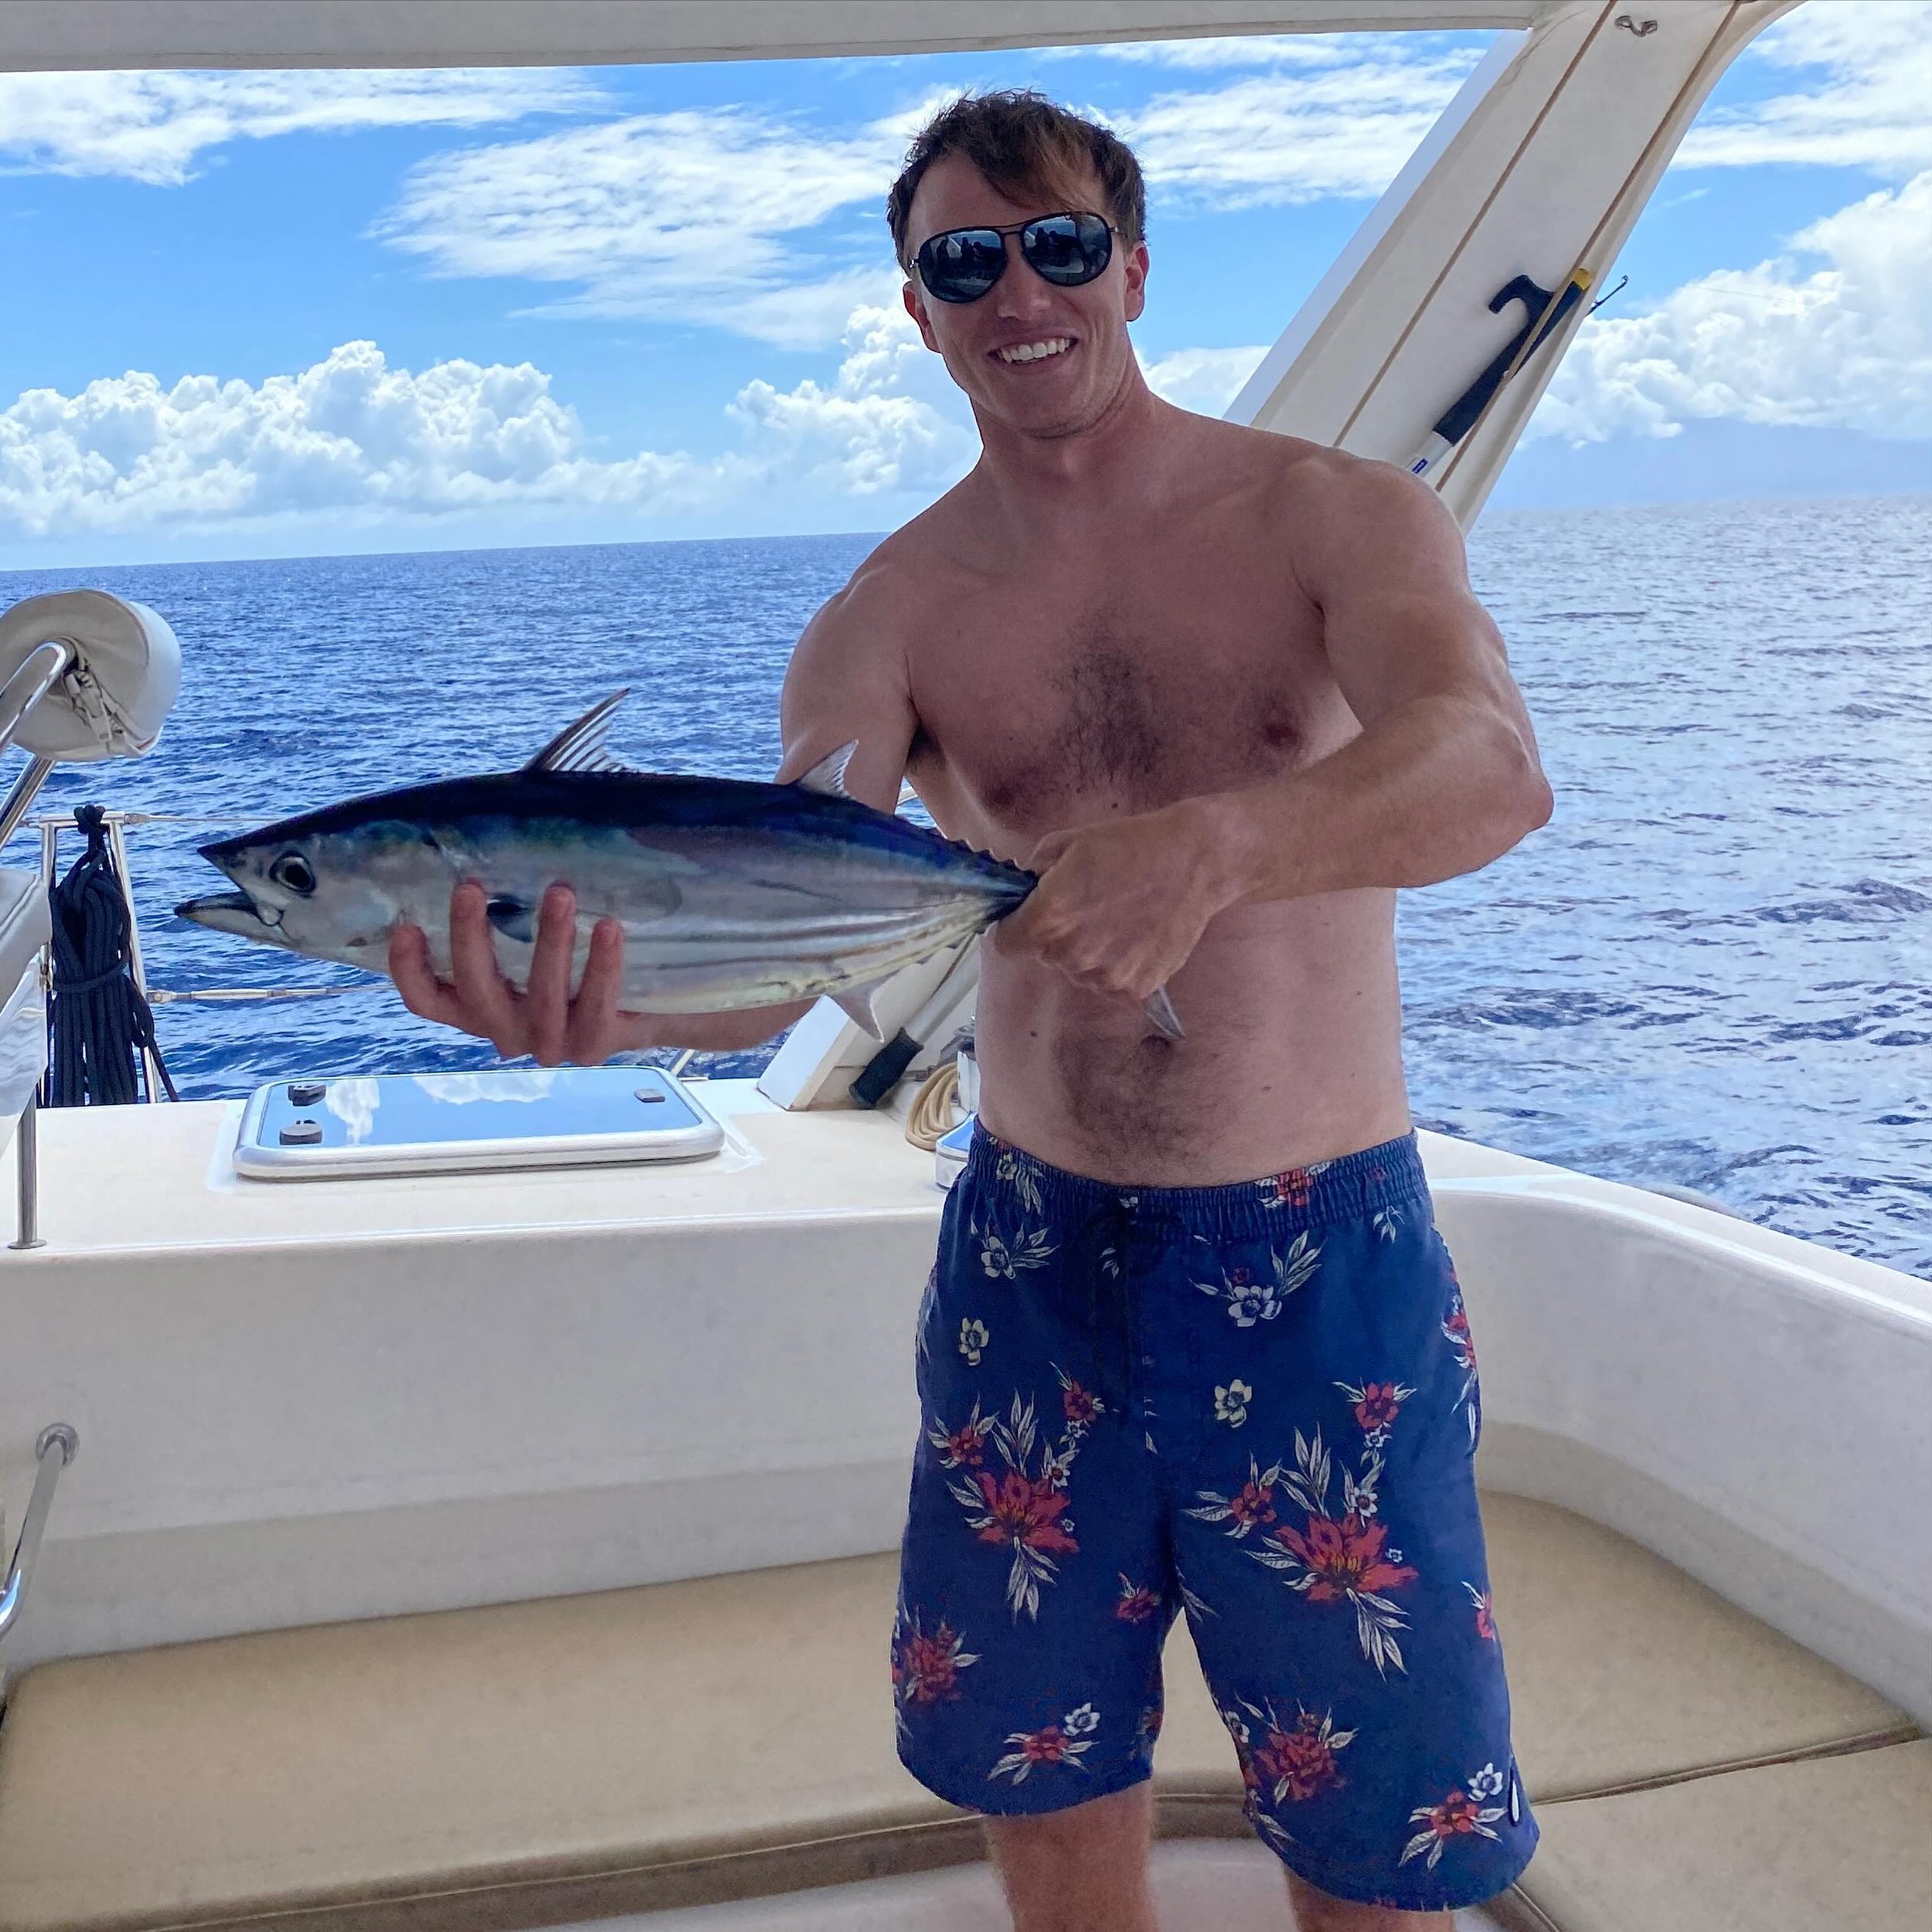 Today our guests asked if we could troll for a fish instead of snorkeling at a second spot. Hooked a nice aku, or skipjack tuna, for Bobby and his family. Filleted on the dock for them to take back to the condo for some sashimi. Doesn&rsquo;t get any